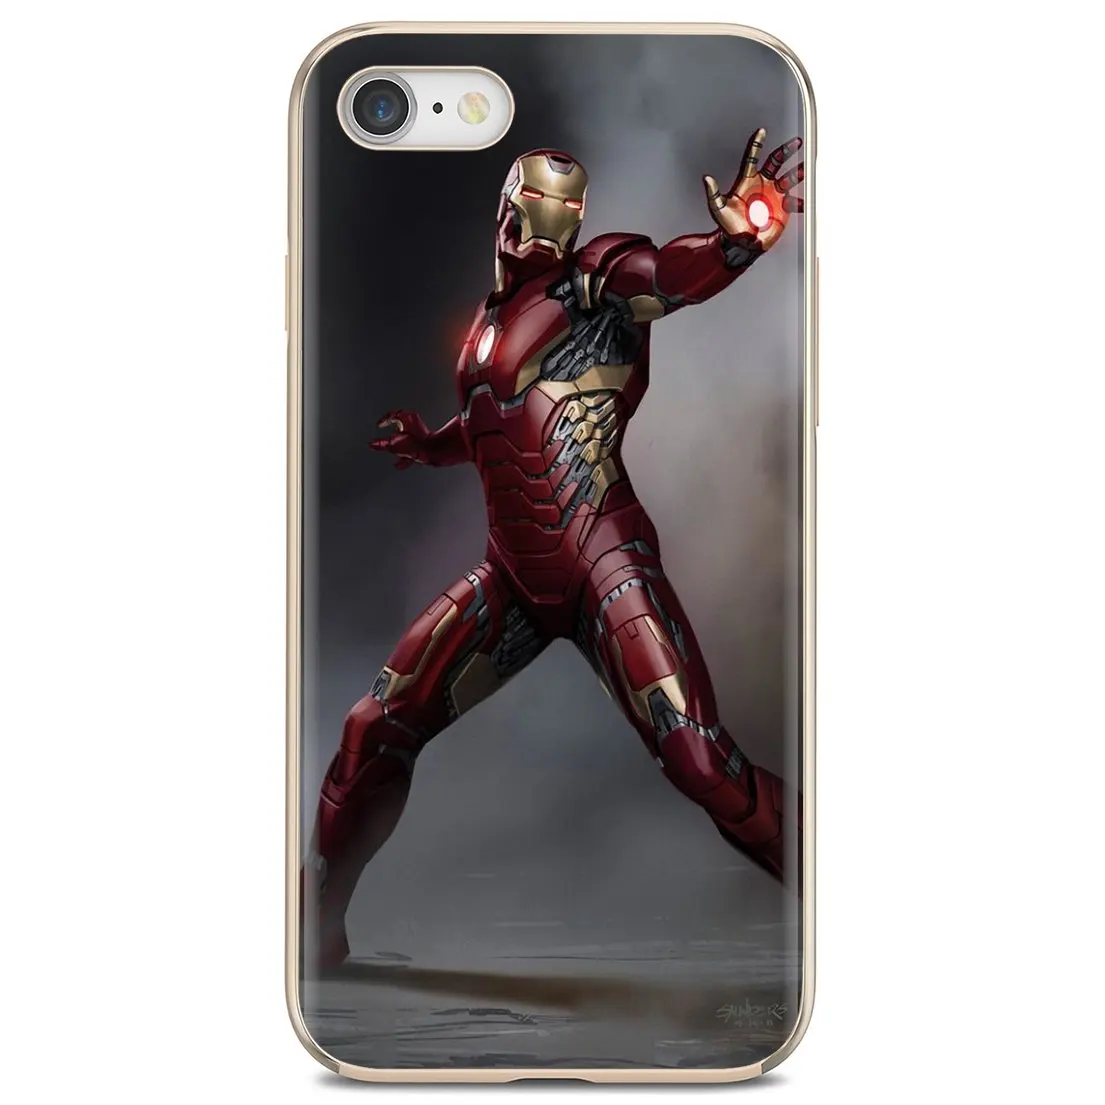 meizu phone case with stones craft For Meizu M6 M5 M6S M5S M2 M3 M3S NOTE MX6 M6t 6 5 Pro Plus U20 Avengers iron man Robert Downey Jr Silicone Case cases for meizu black Cases For Meizu